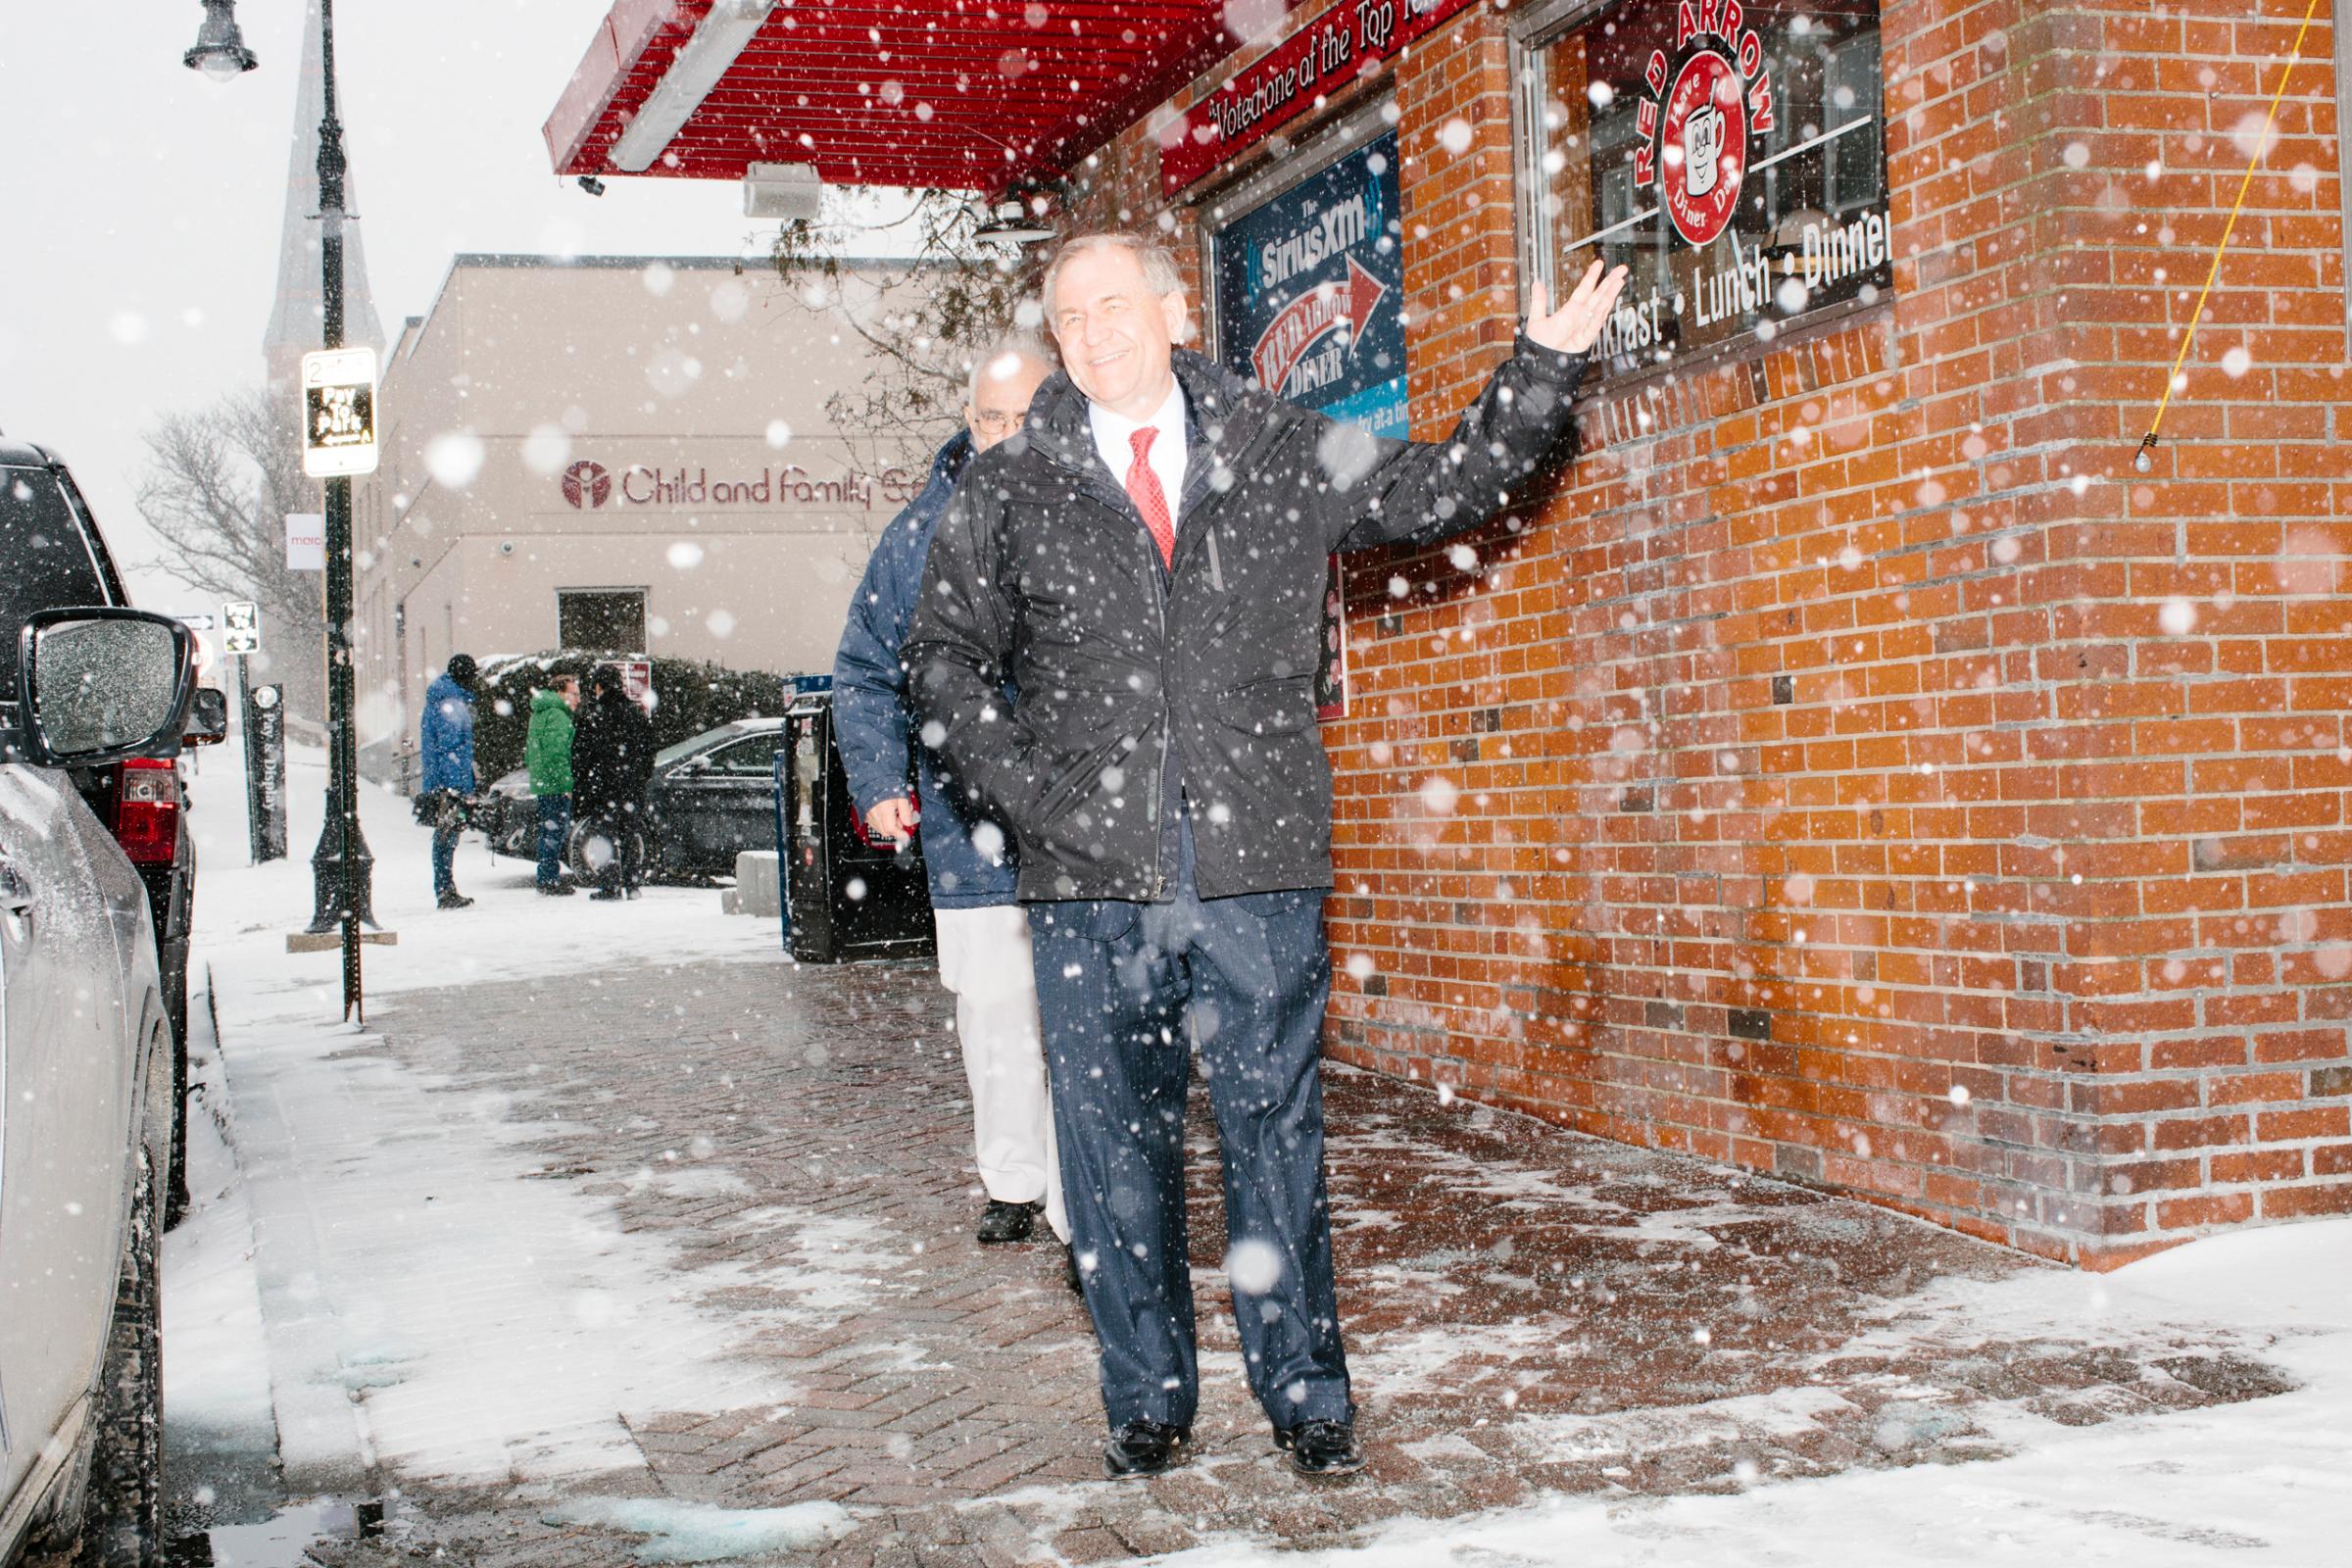 Former Virginia governor and Republican presidential candidate Jim Gilmore walks through the snow with brother-in-law Lloyd Gatling, of Suffolk, Virginia, after visit the Red Arrow Diner in Manchester, New Hampshire, on Mon., Feb. 8, 2016. The Red Arrow Diner is a frequent stop of political candidates. Sirius XM was broadcasting live from the diner Monday and Tuesday. Gilmore finished in last place among major Republican candidates still in the race with a total of 150 votes.